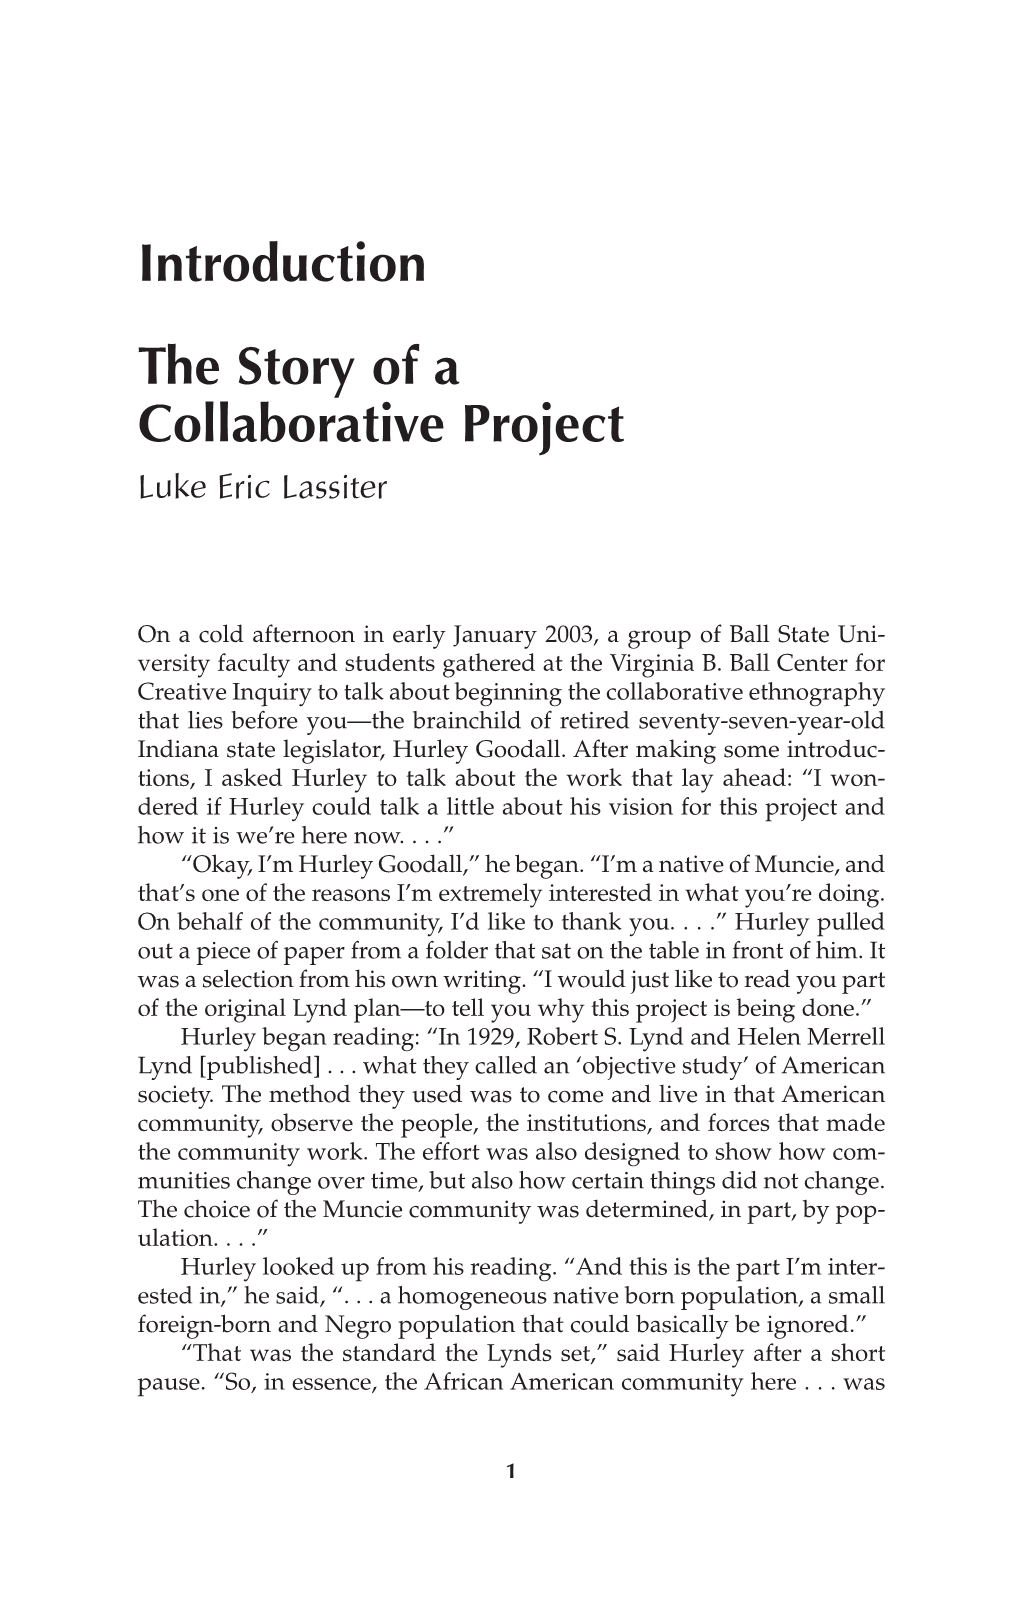 Introduction the Story of a Collaborative Project Luke Eric Lassiter